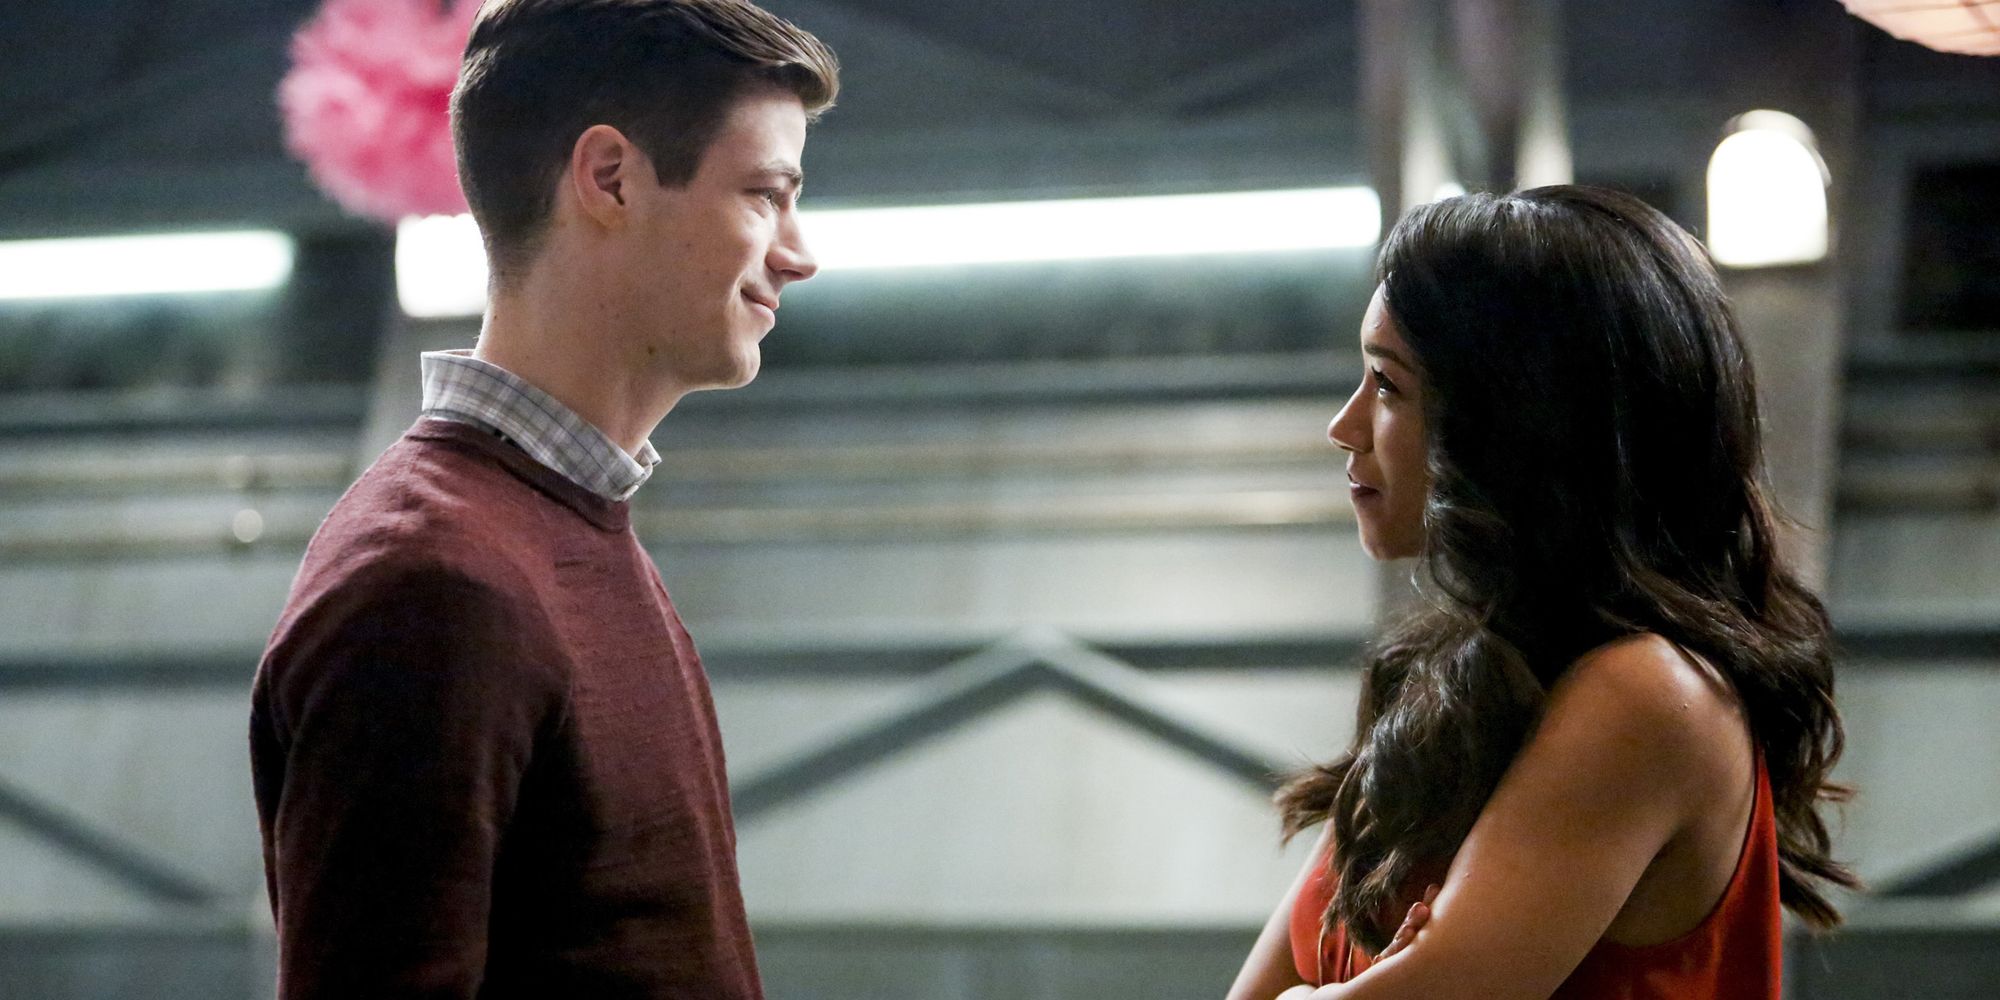 Grant Gustin and Candice Patton in The Flash